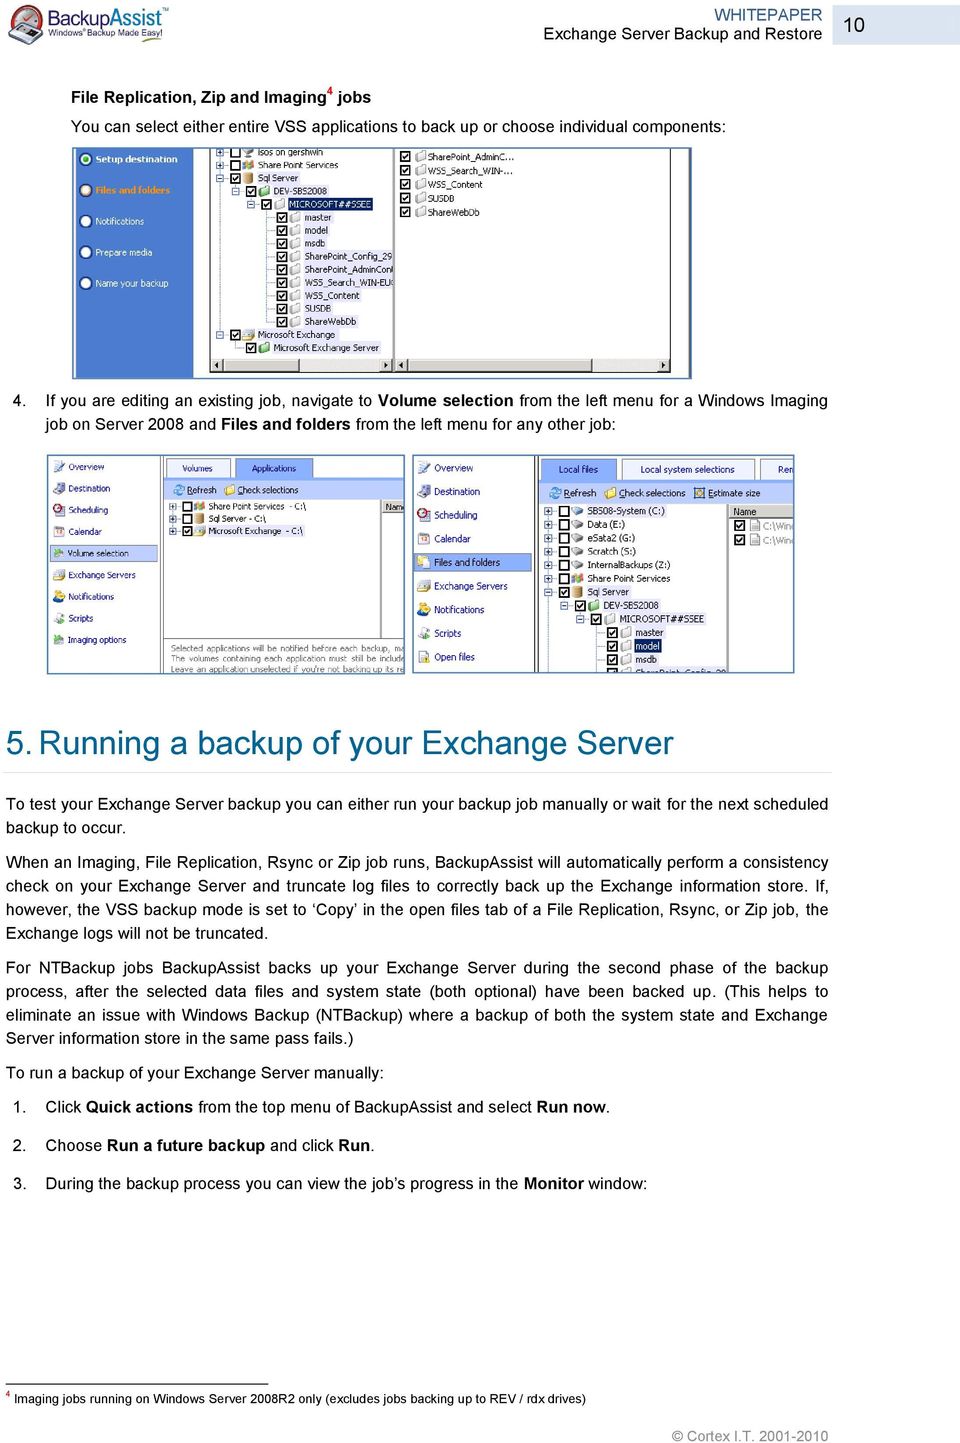 Running a backup of your Exchange Server To test your Exchange Server backup you can either run your backup job manually or wait for the next scheduled backup to occur.